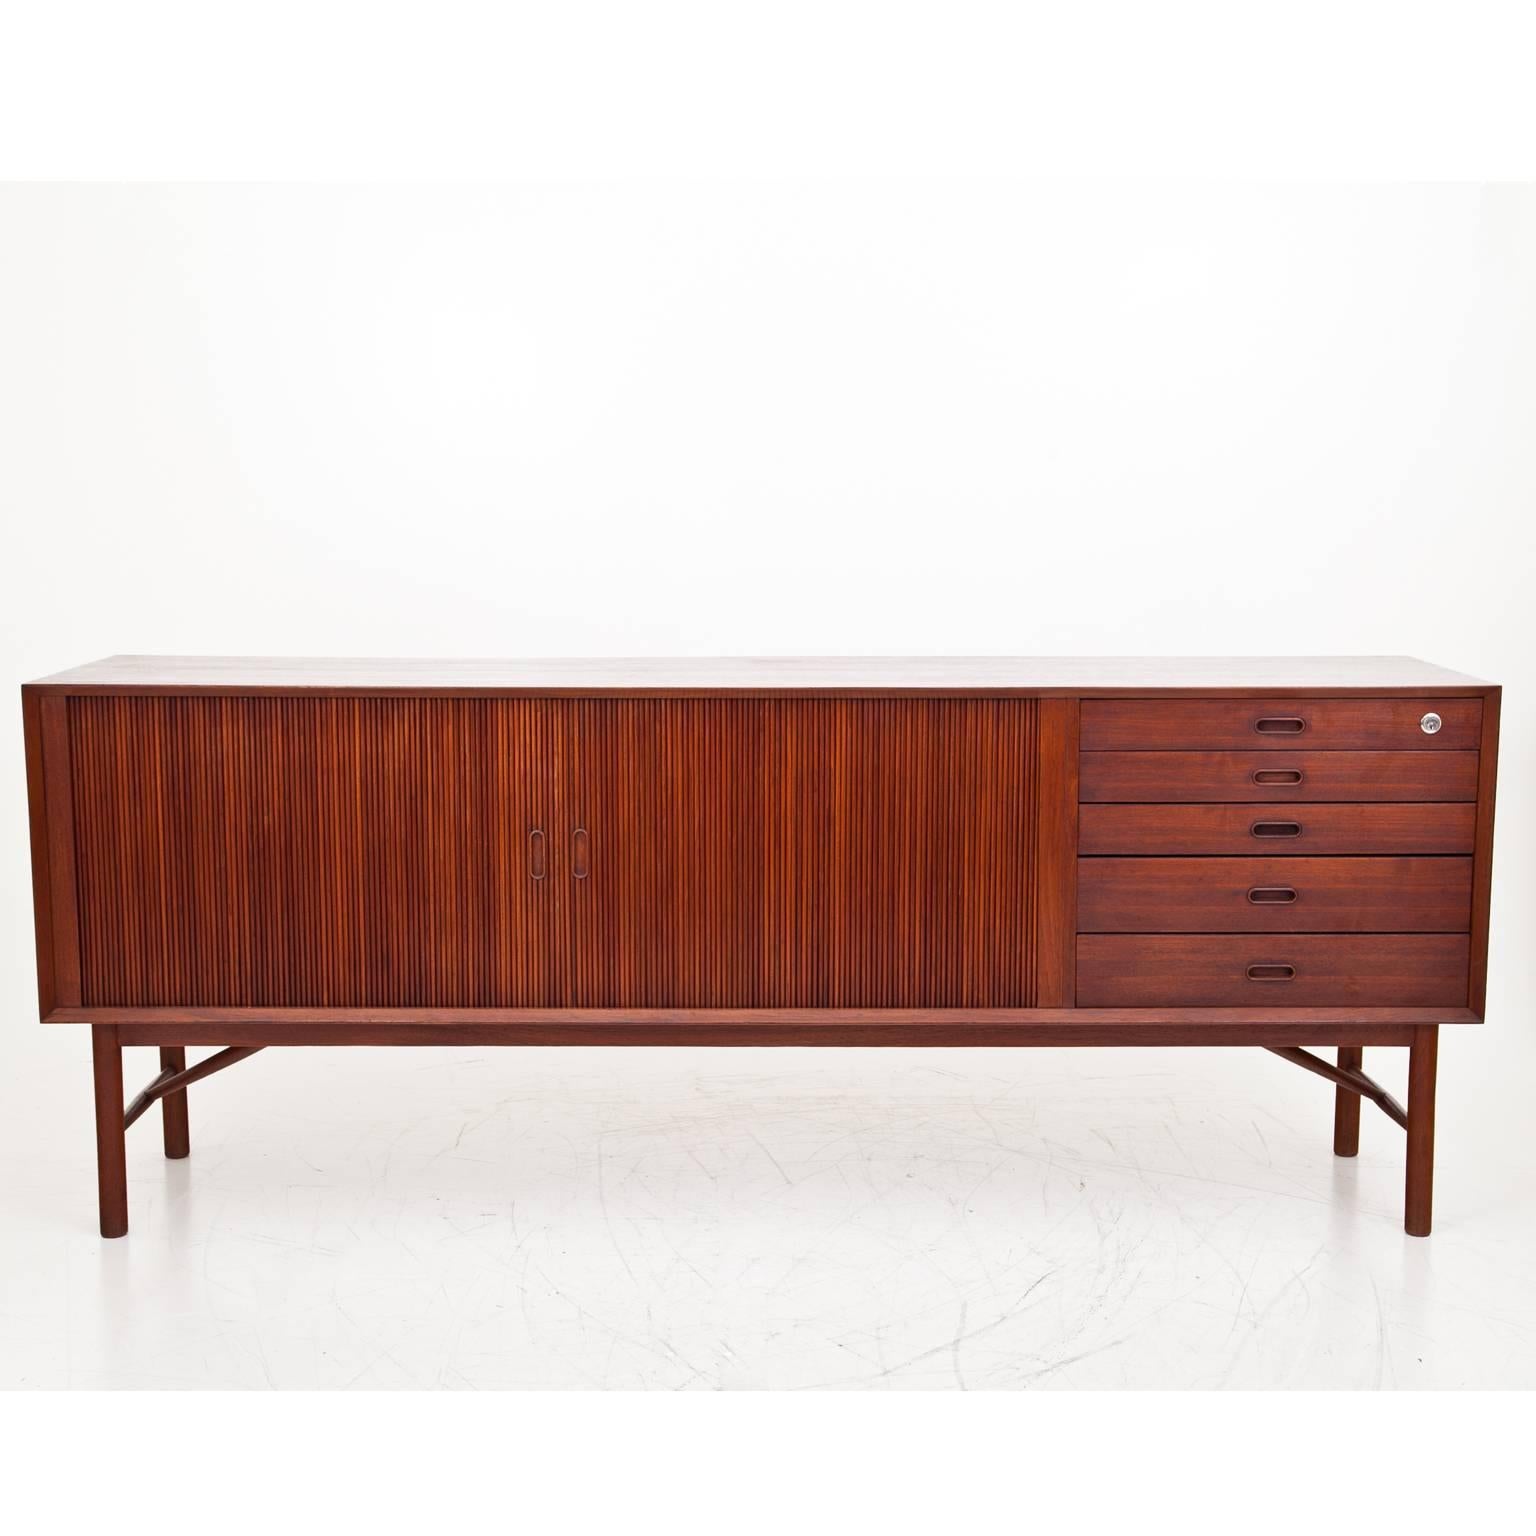 Mid-20th Century Sideboard in the Style of Orla Mølgaard-Nielsen and Peter Hvidt, Denmark, 1950s